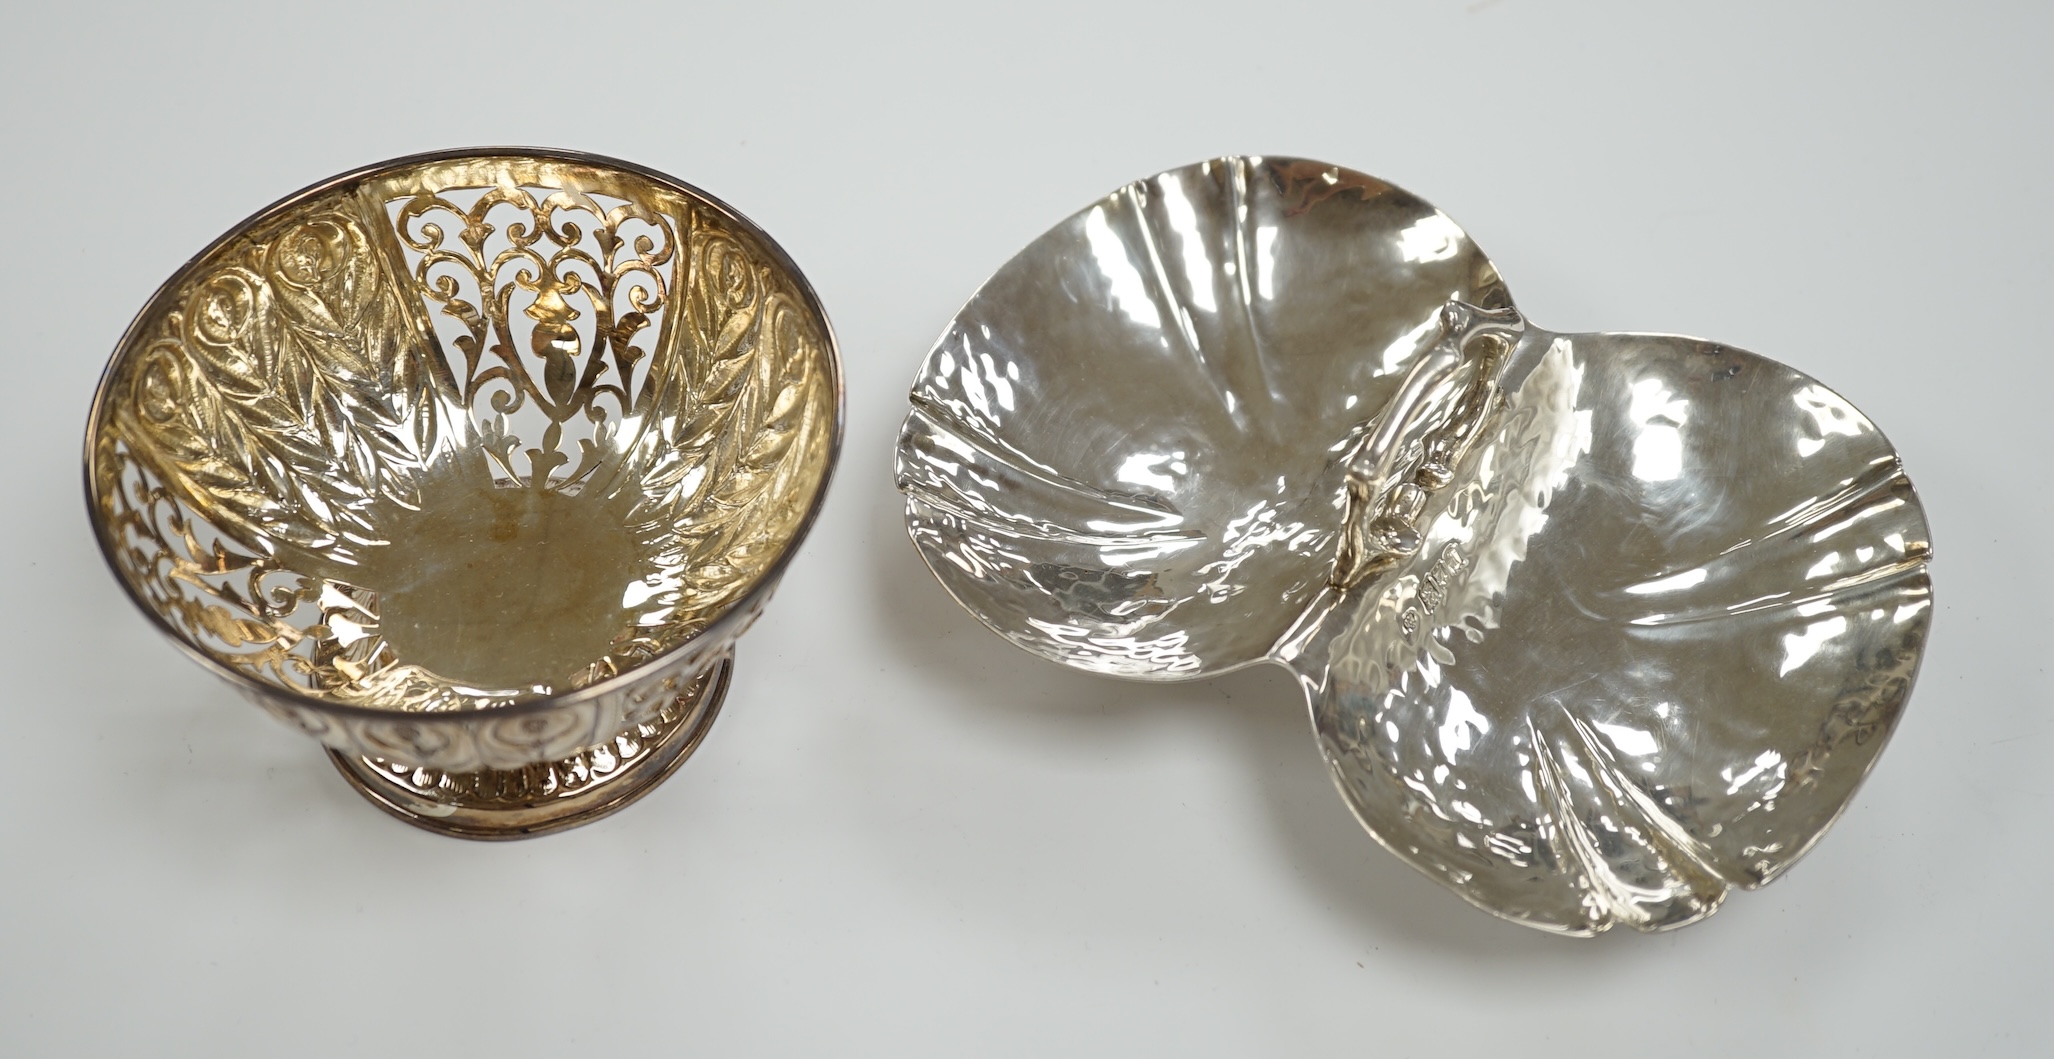 An Edwardian Arts & Crafts silver single handle two division dish, by Charles Edwards, London, 1904, 16.3cm and a modern pierced silver bowl, 9.4oz.